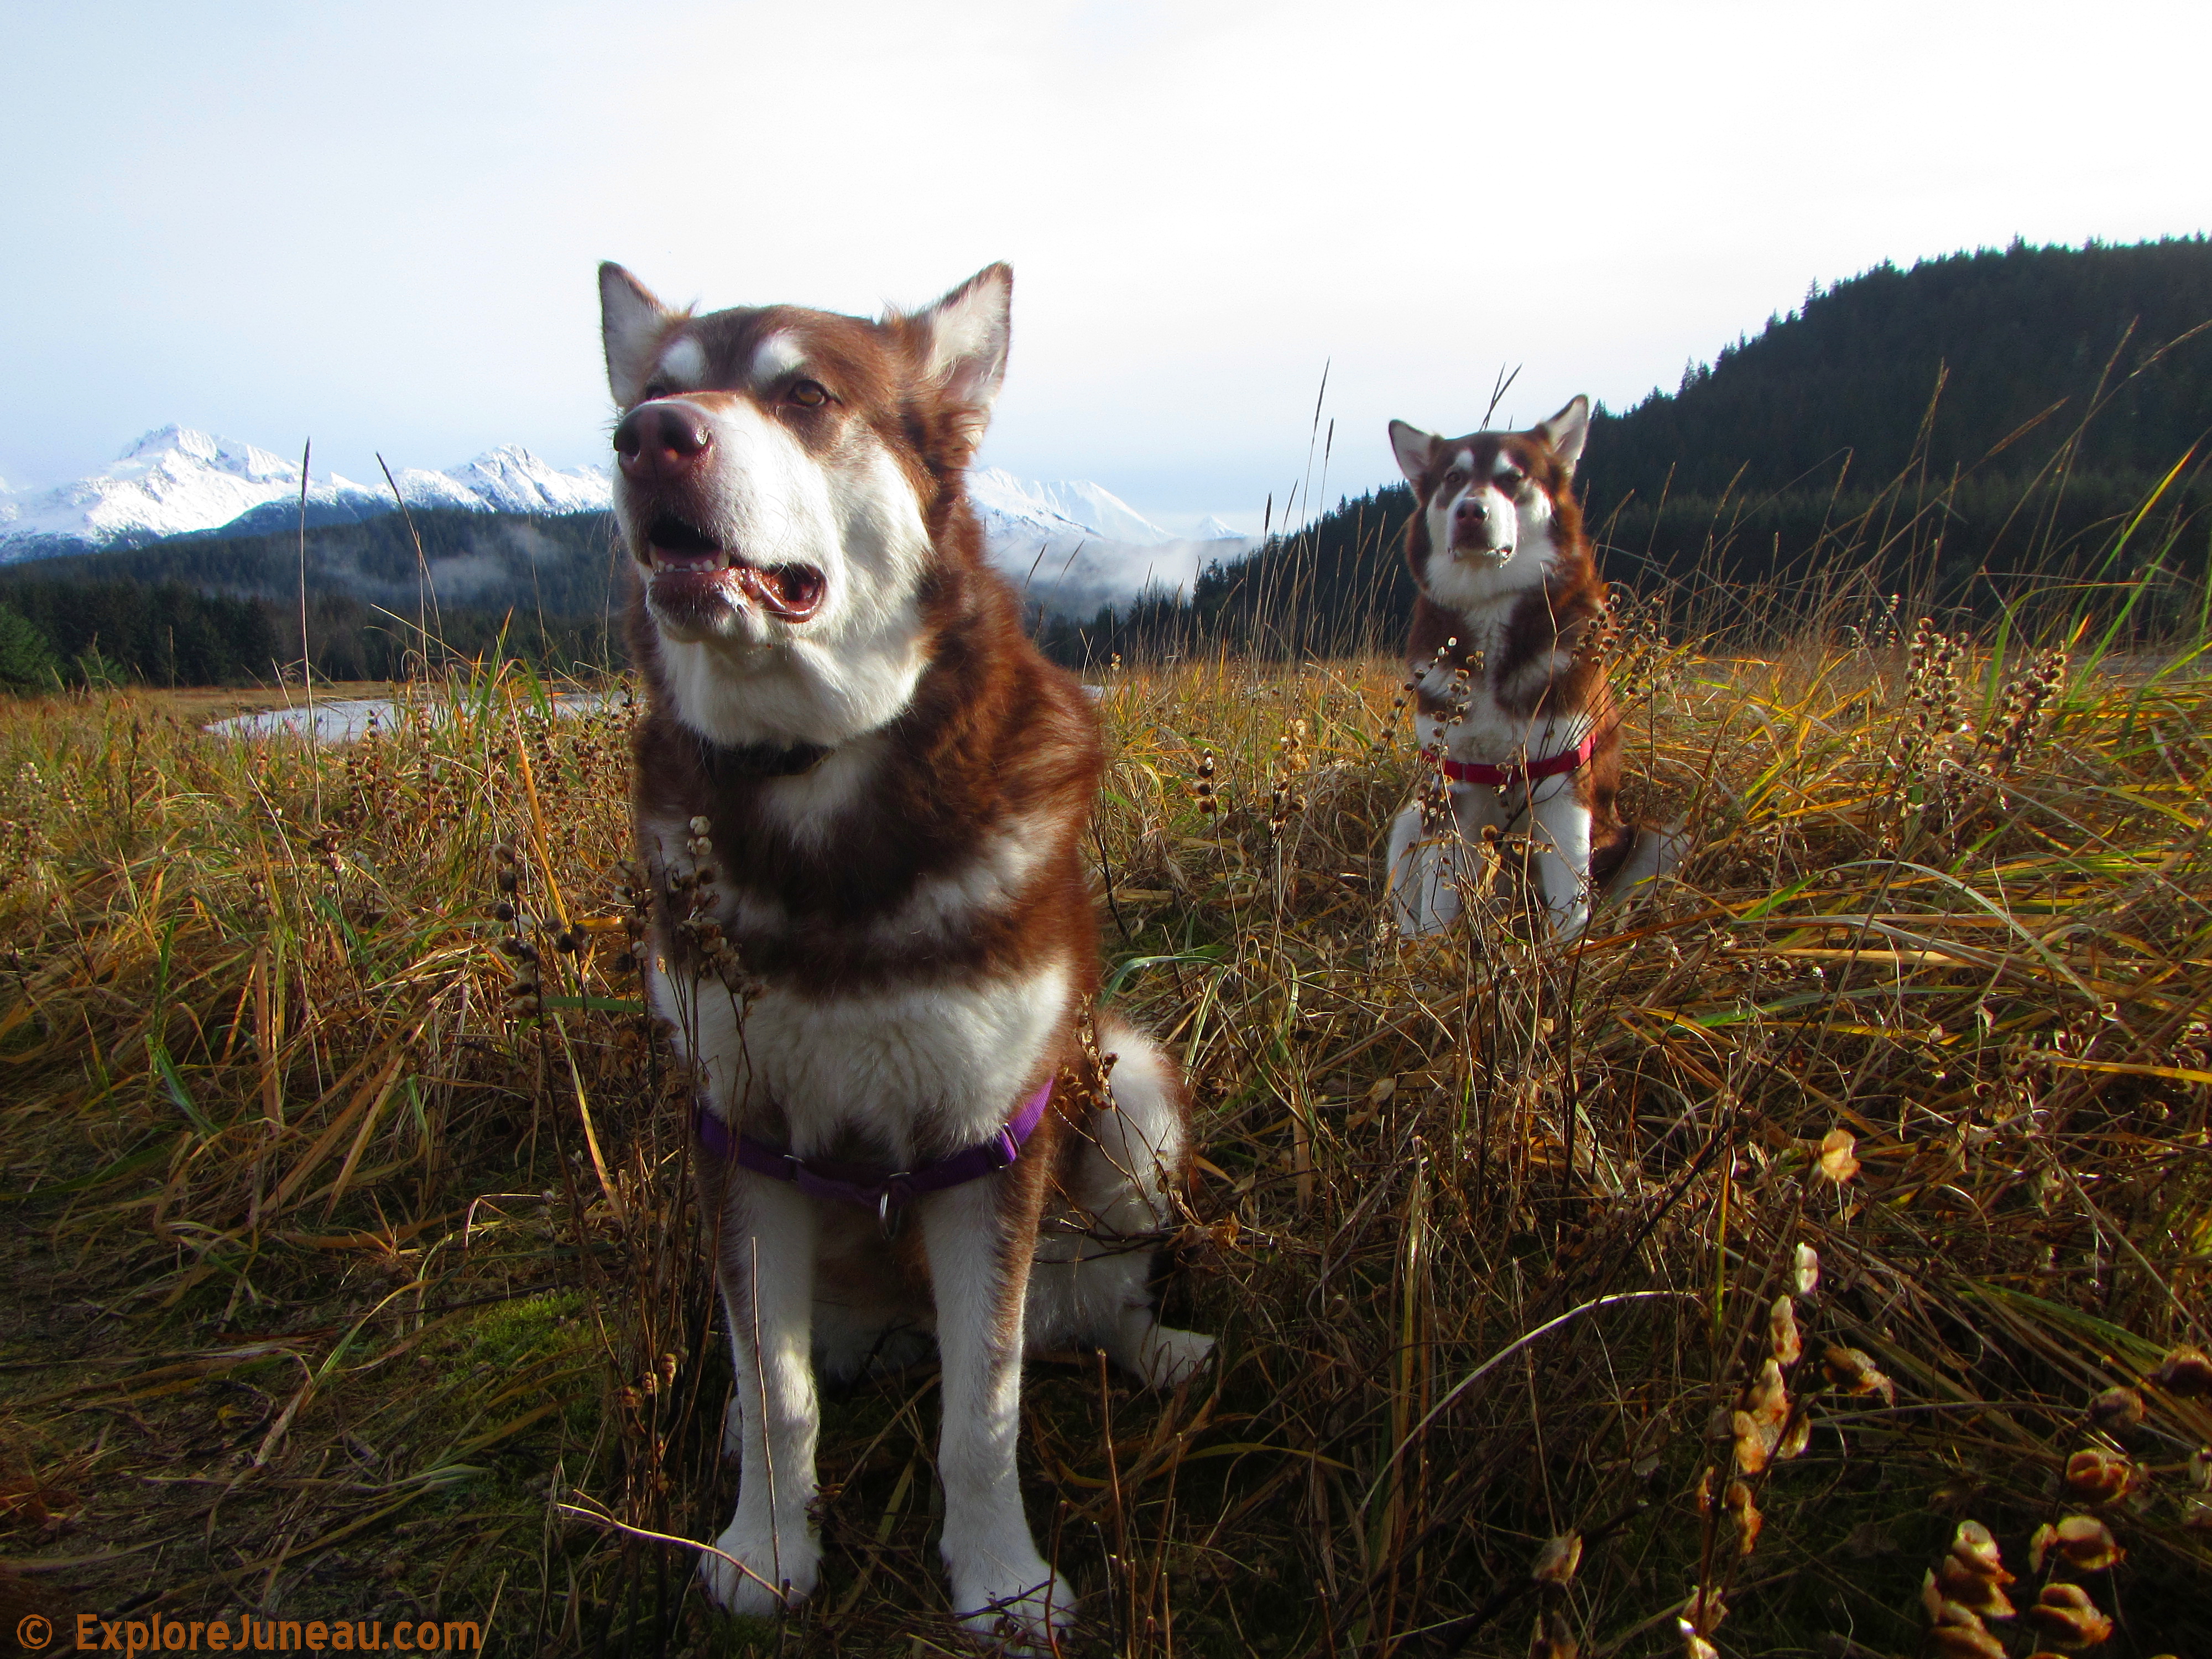 Skadi & Freya with Russell Josh Peterson at Eagle Beach, Juneau Alaska ~ Thank you for clicking 